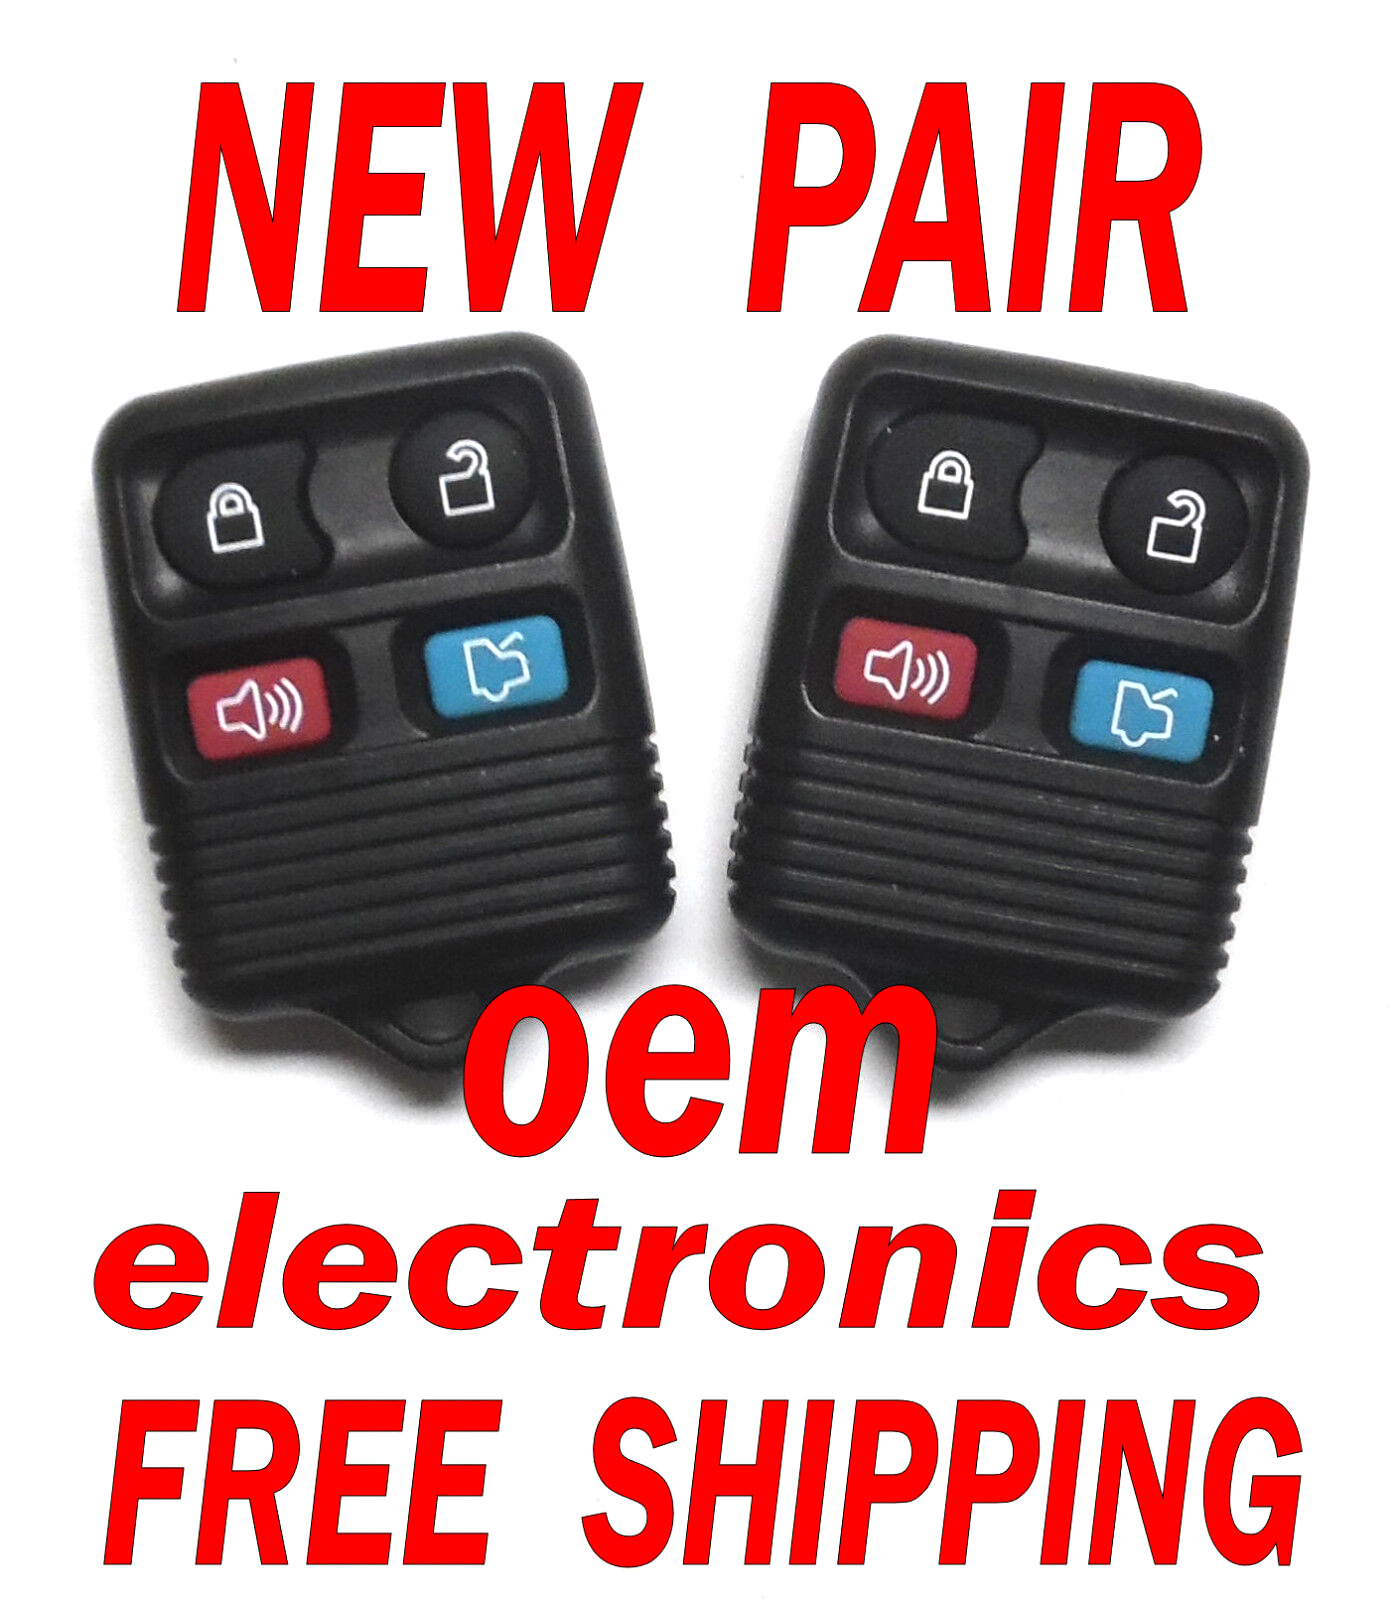 PAIR OEM ELECTRONIC 4 BUTTON REMOTE KEY FOB FOR 2002-2005 FORD EXPLORER